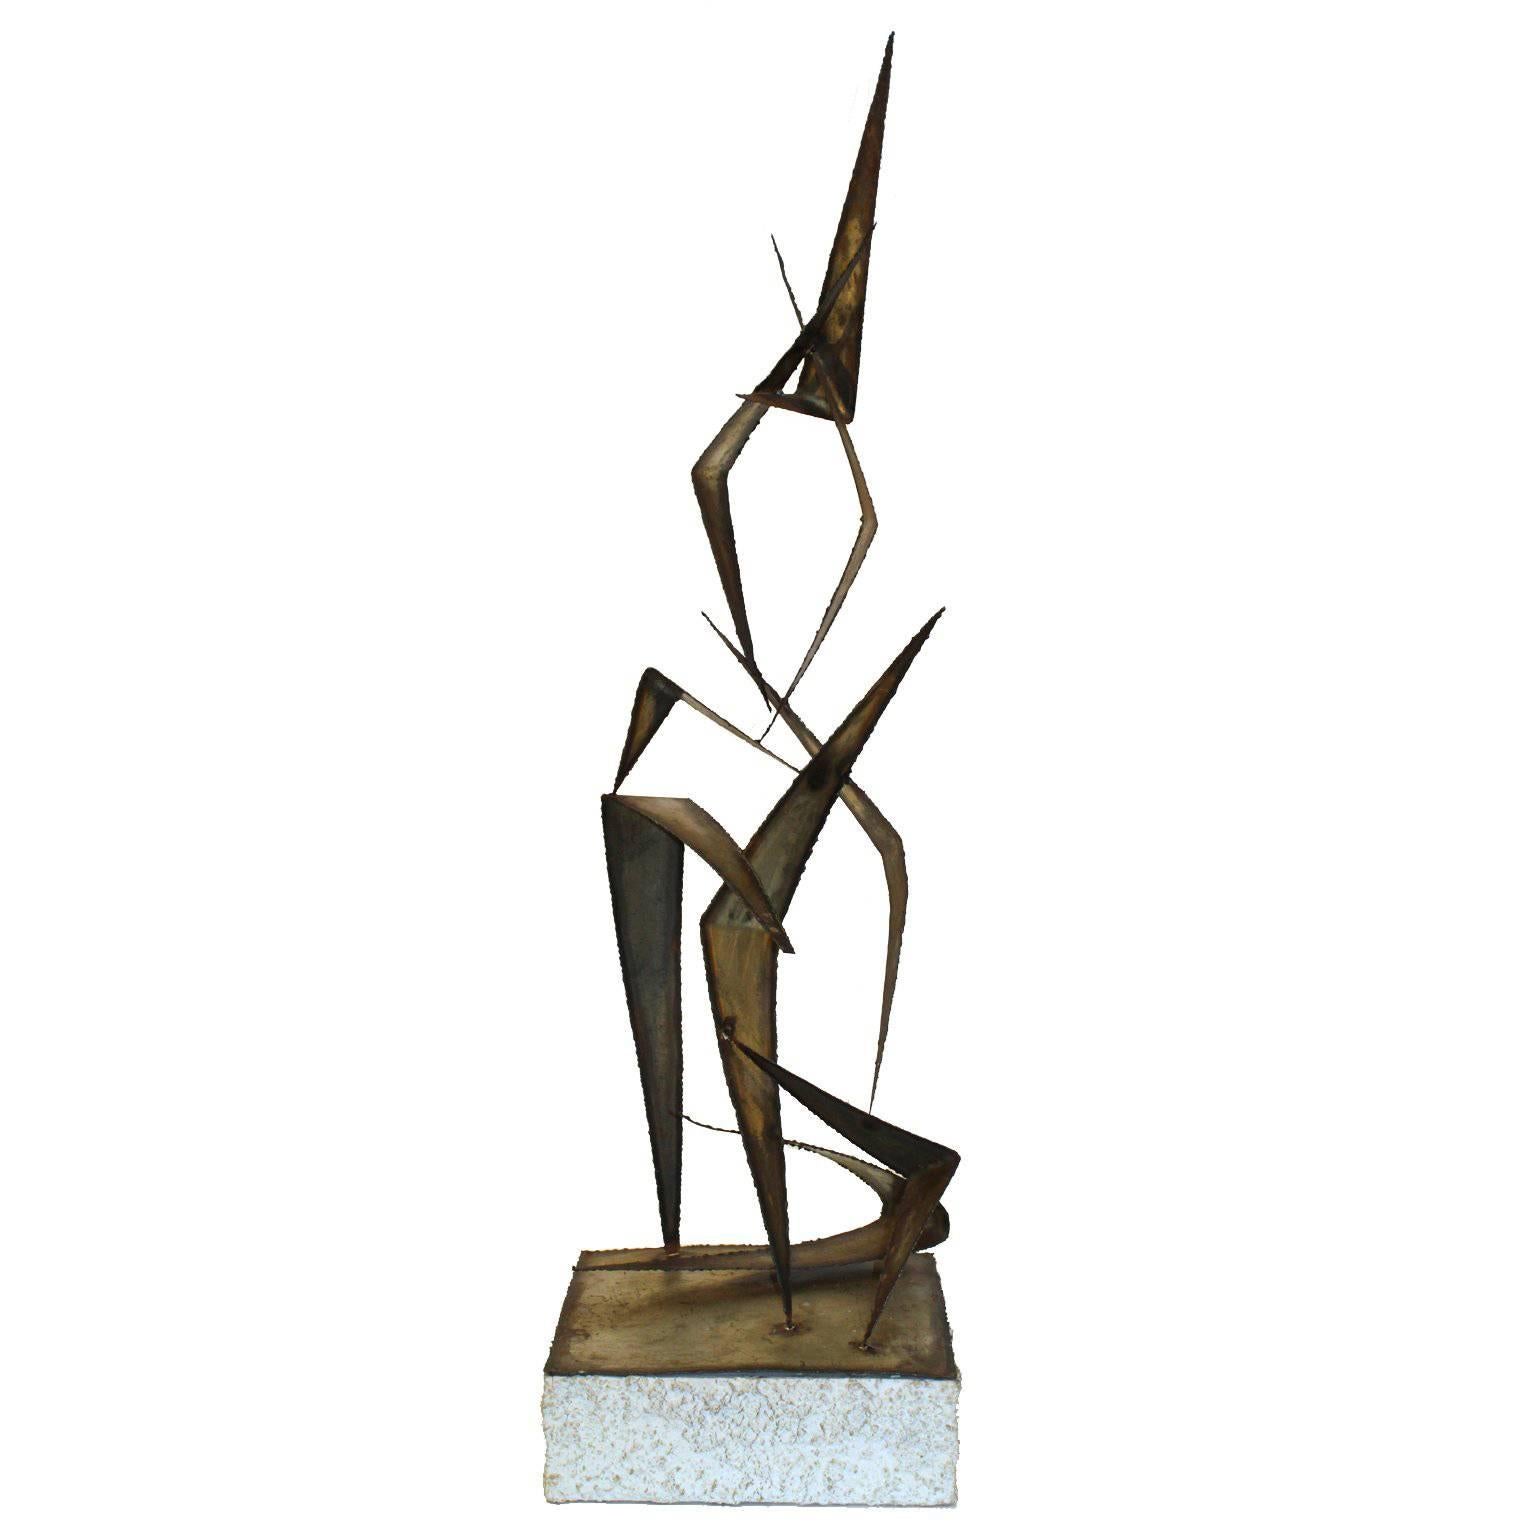 Curtis Jere Midcentury Brutalist Welded and Torched Metal Sculpture For Sale